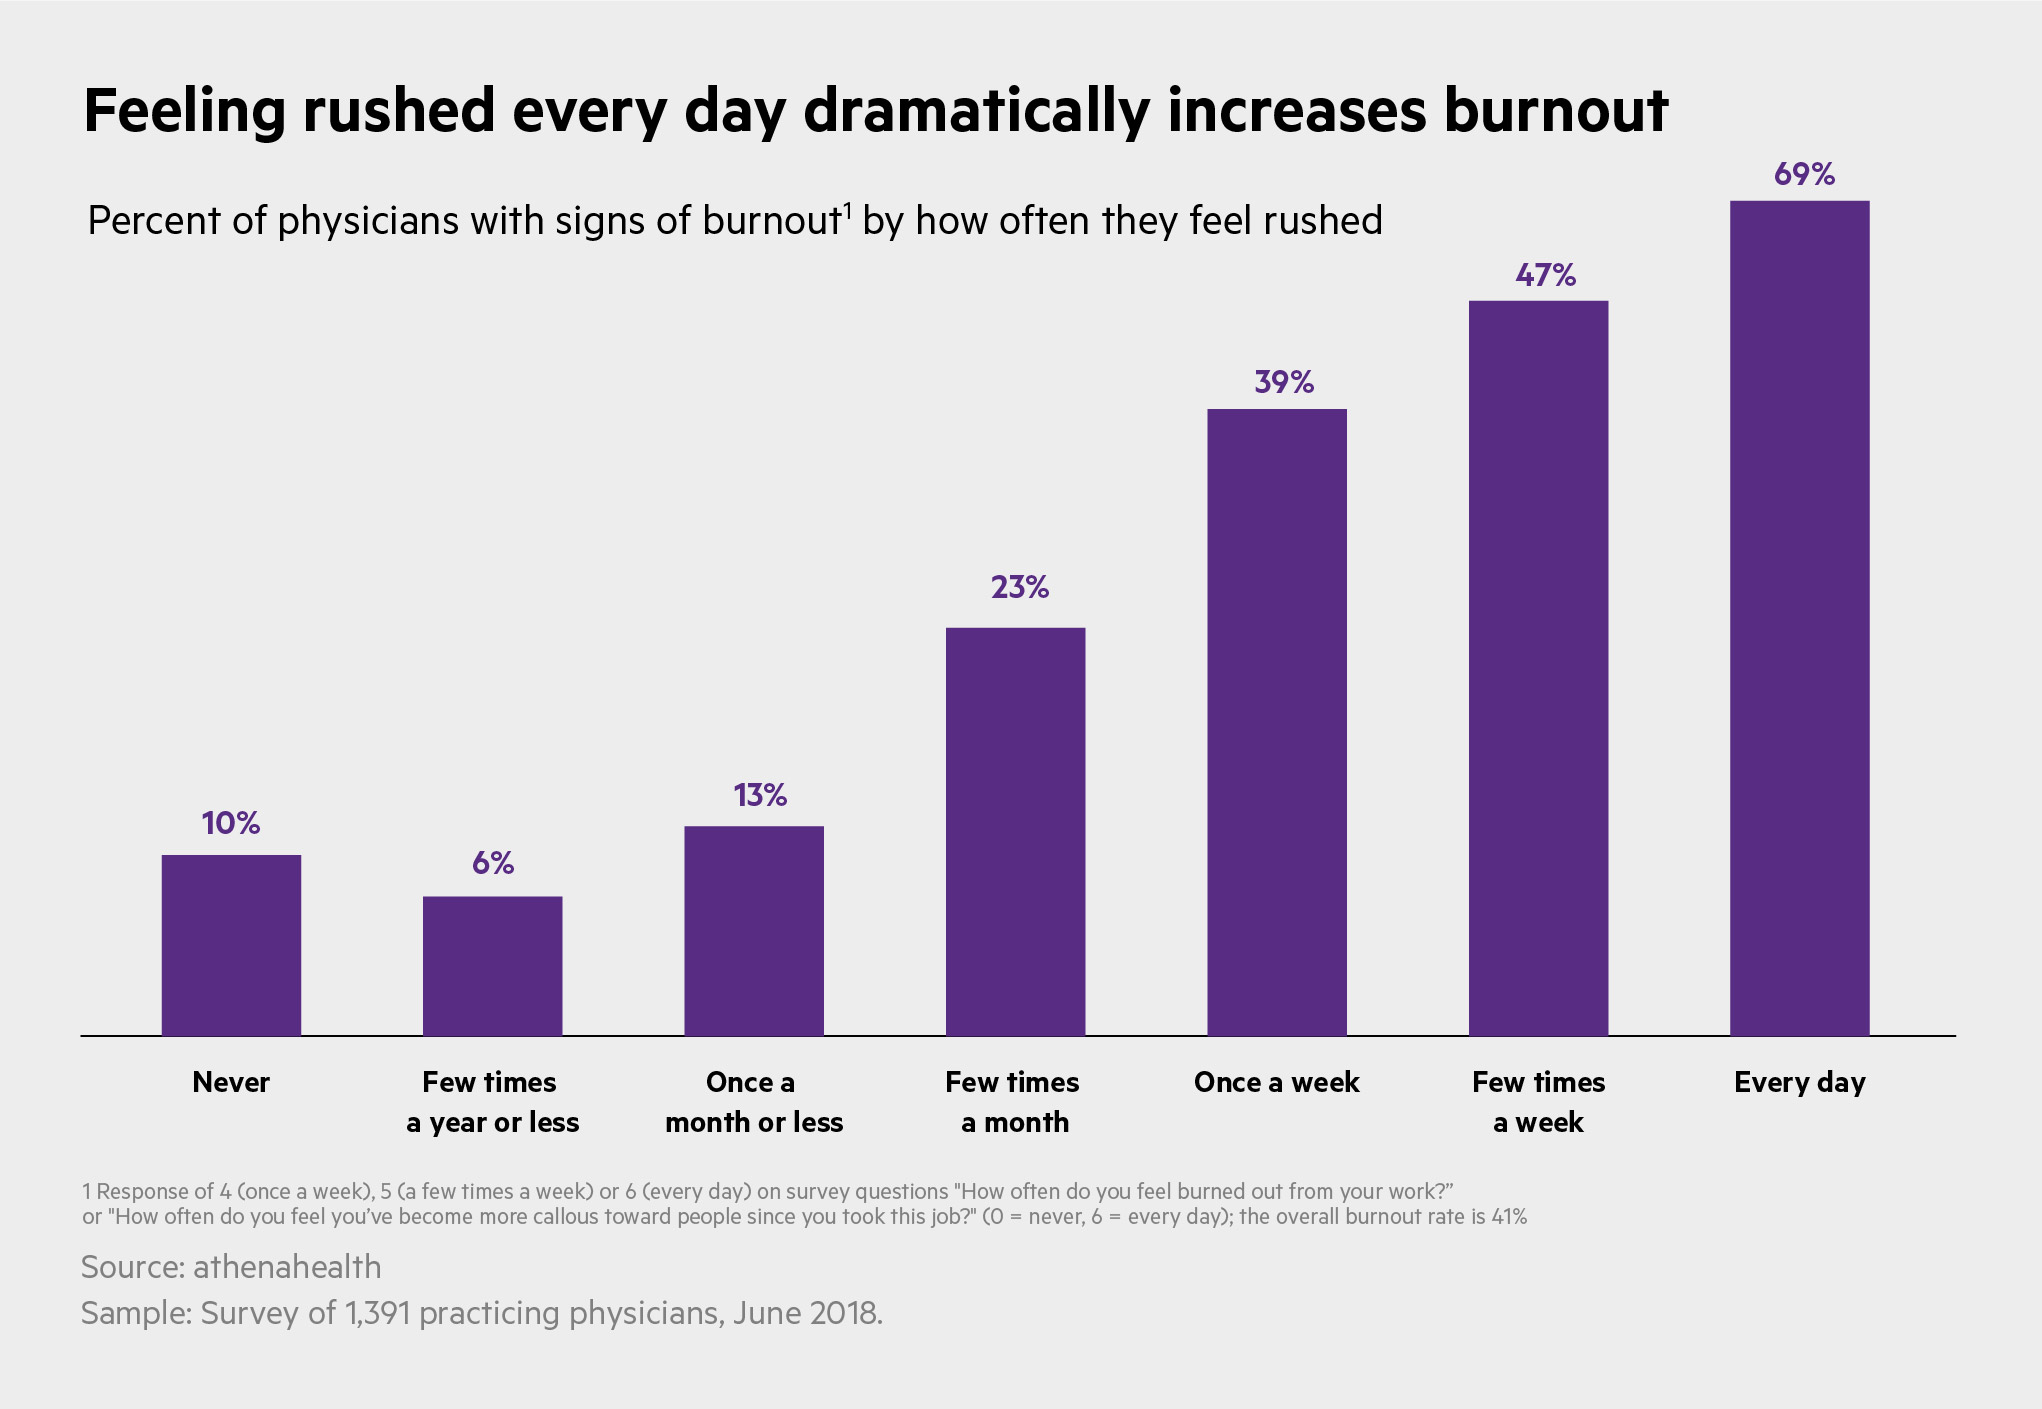 Bar chart showing the feeling of being rushed increases burnout amongst physicians